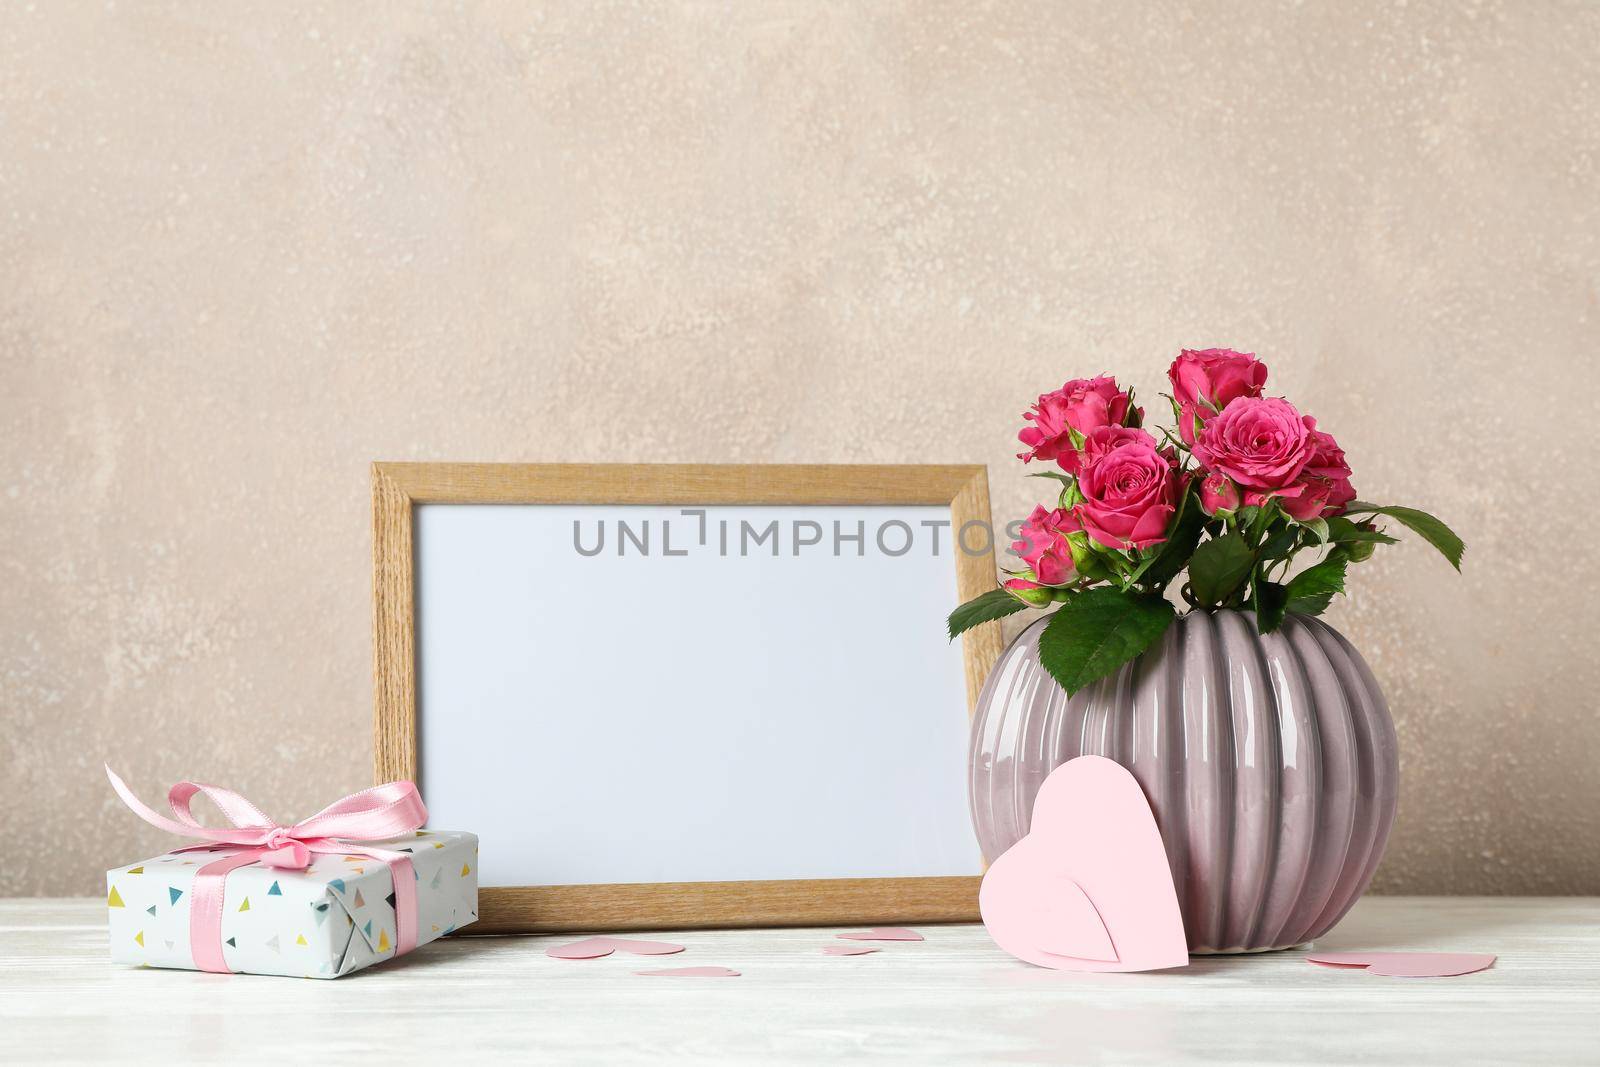 Vase with pink roses, empty frame, gift and little hearts on white table against light brown background by AtlasCompany